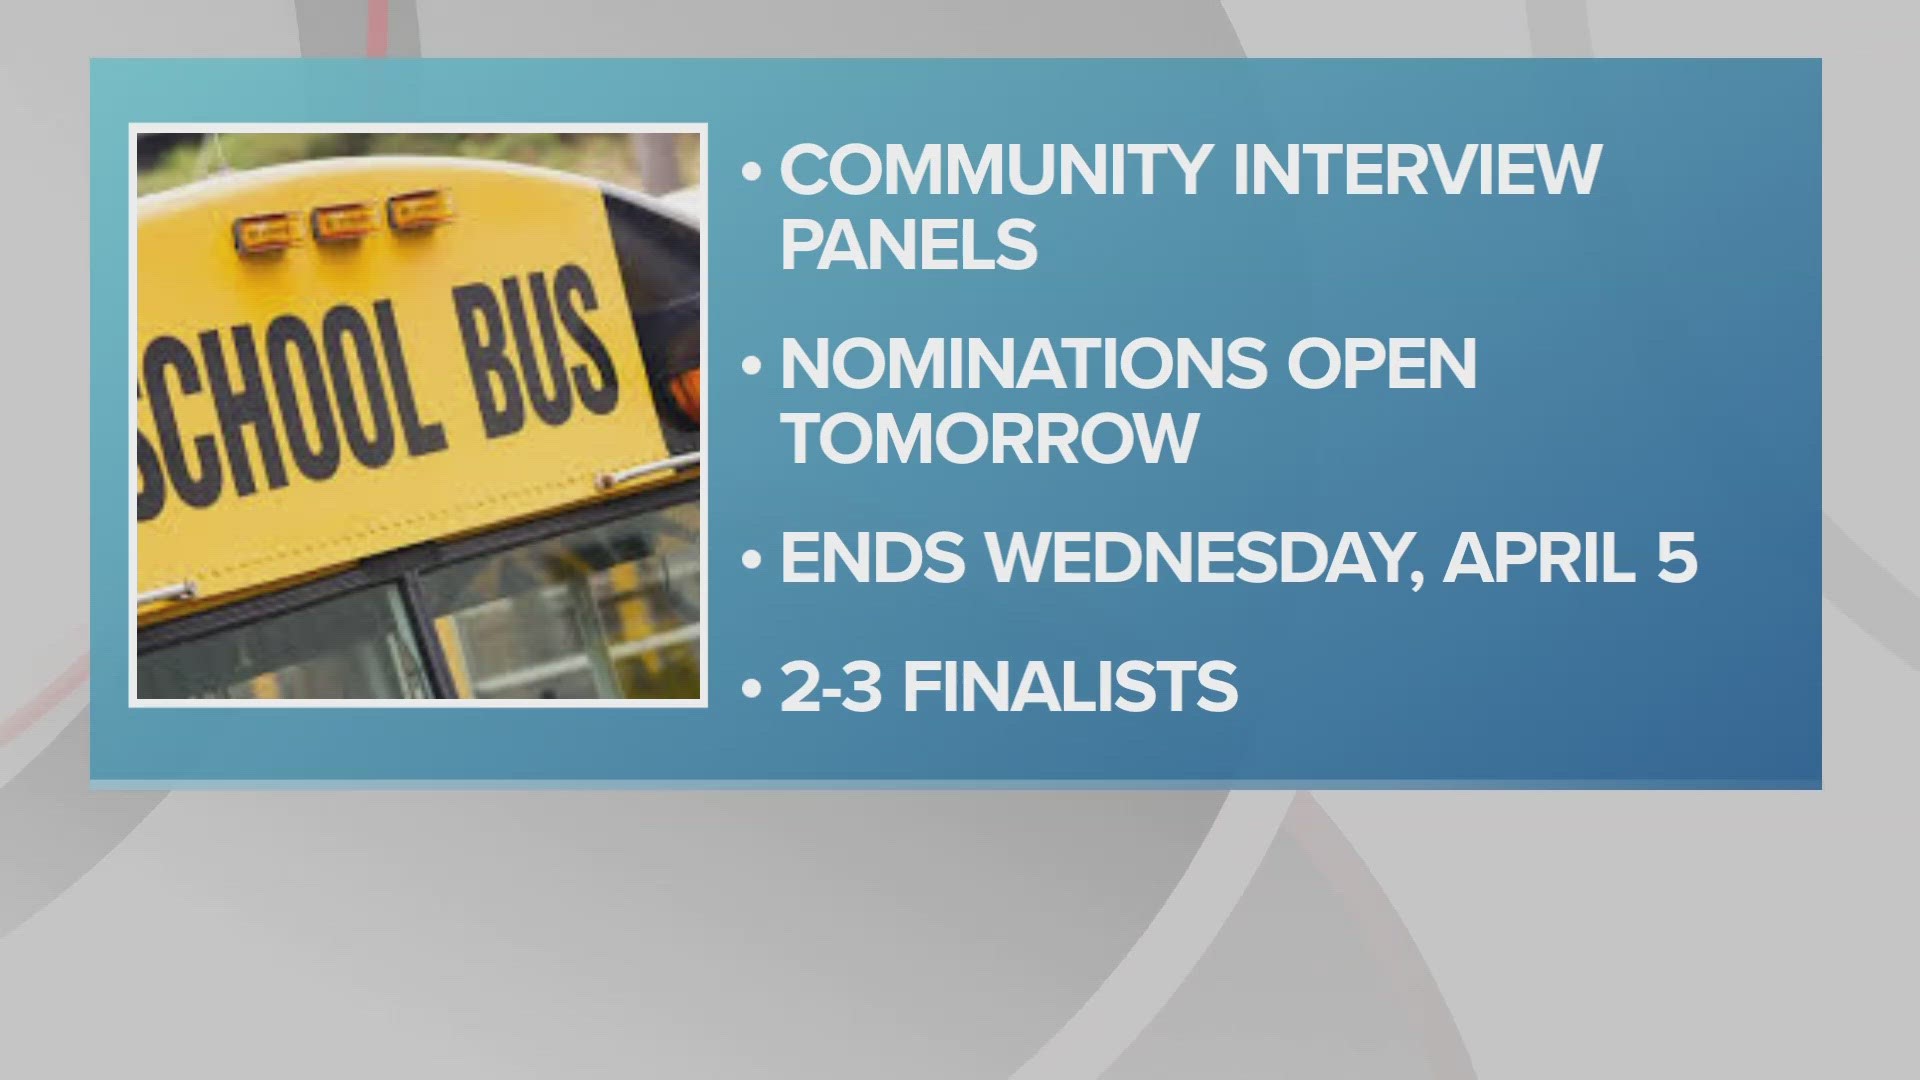 The window for interview panel nominations will open on Wednesday, March 15 and last through Wednesday, April 5.